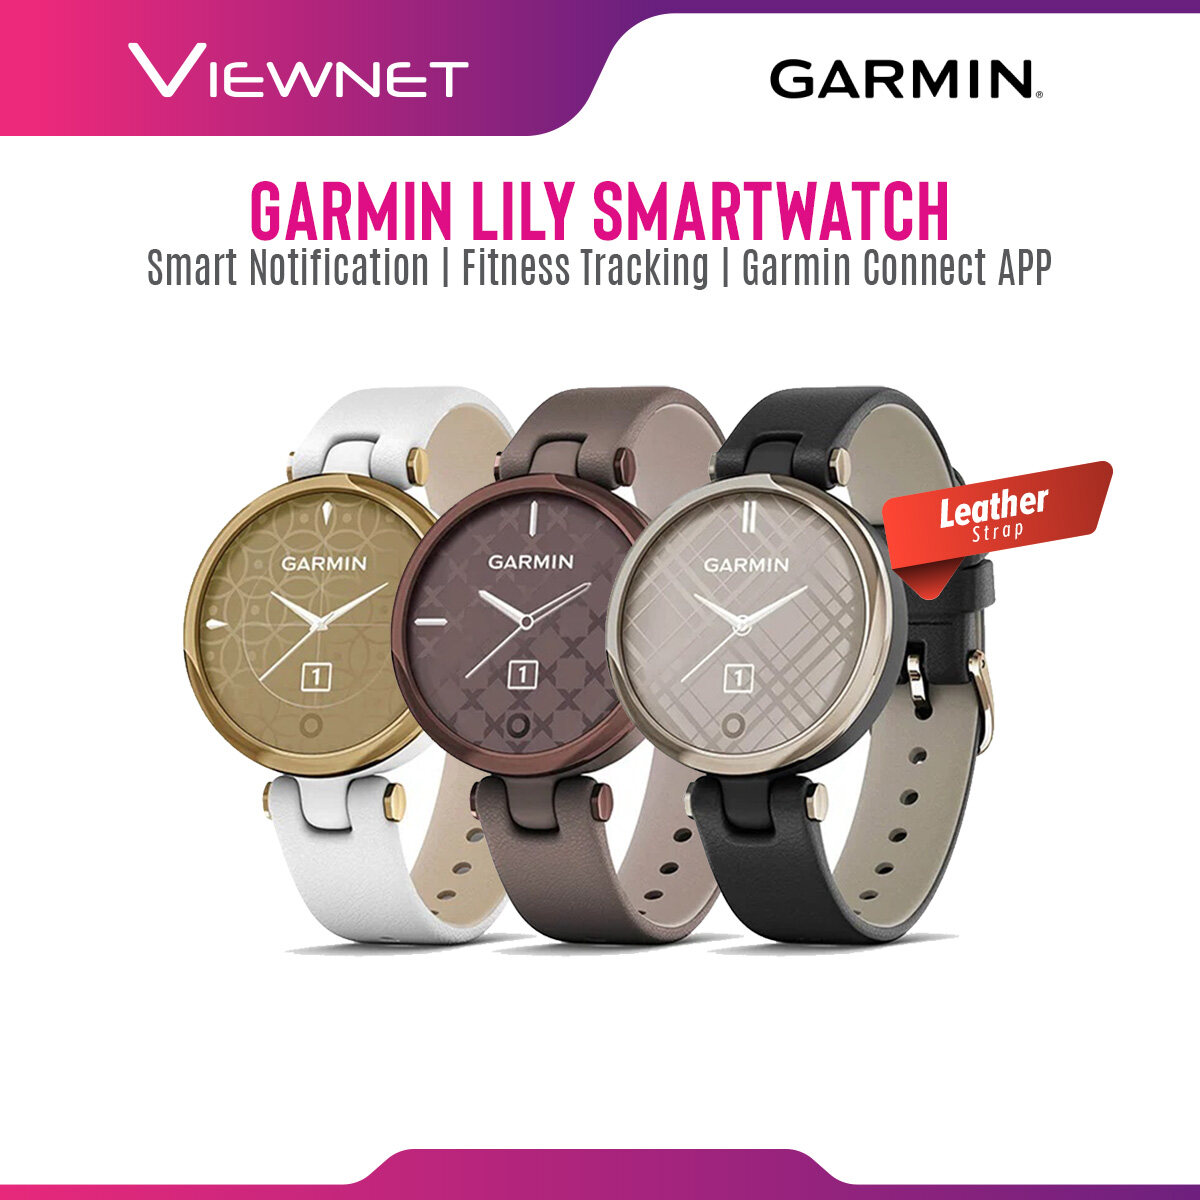 [NEW ARRIVAL] Garmin Lily Smart Watch (Silicone / Leather) - Stylish Patterned Lens, Smart Touchscreen, Small and Fashionable smartwatch